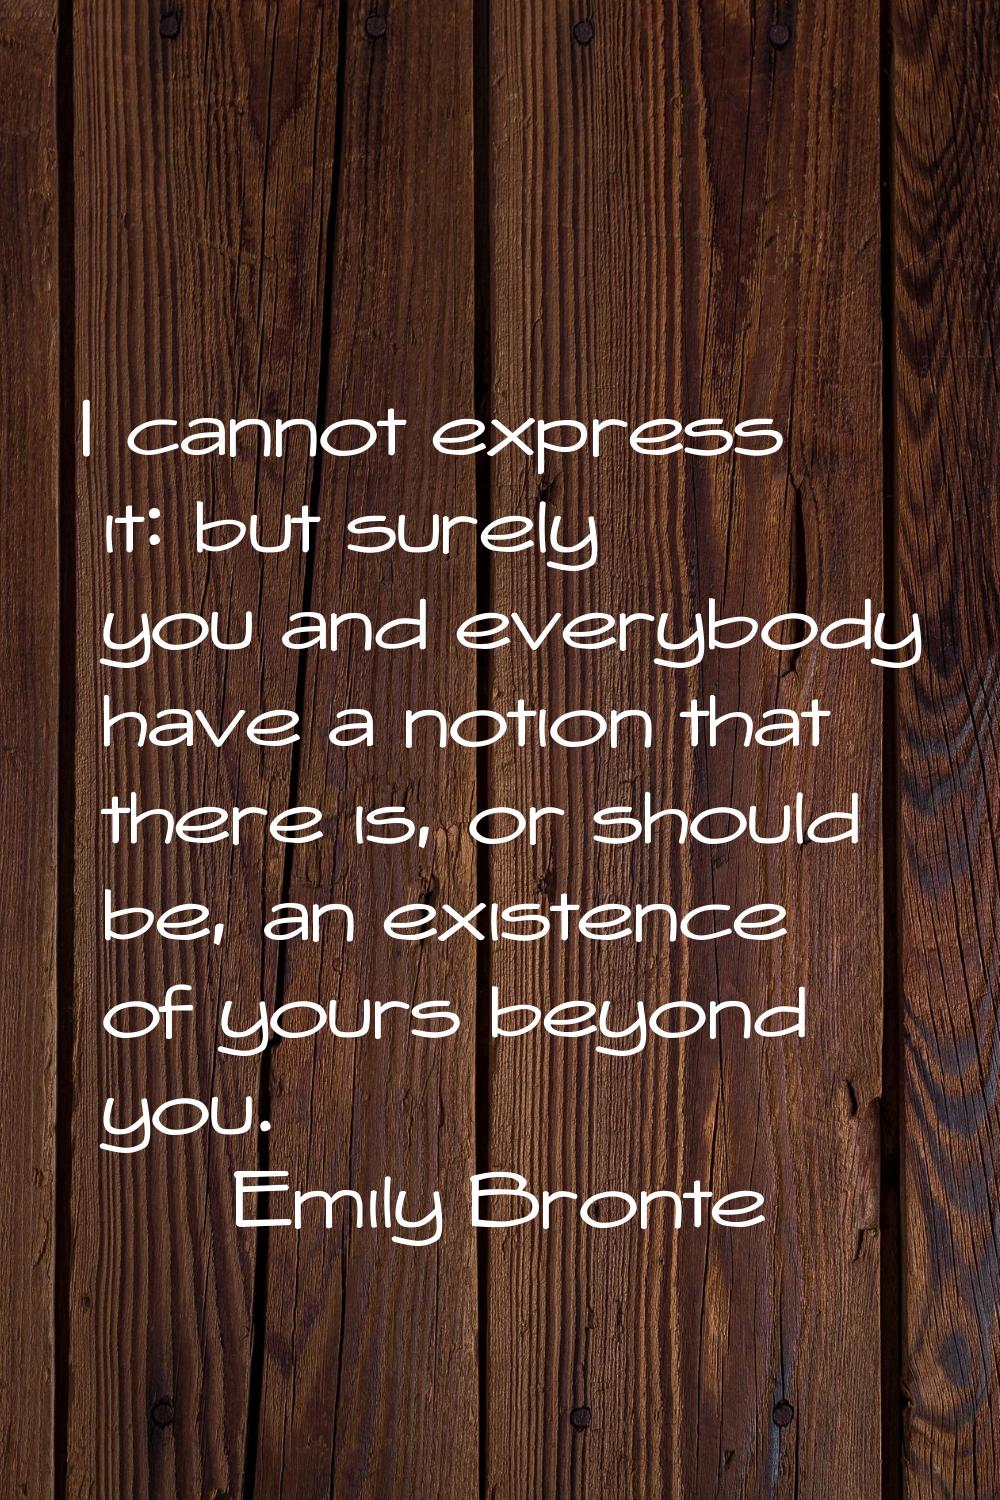 I cannot express it: but surely you and everybody have a notion that there is, or should be, an exi